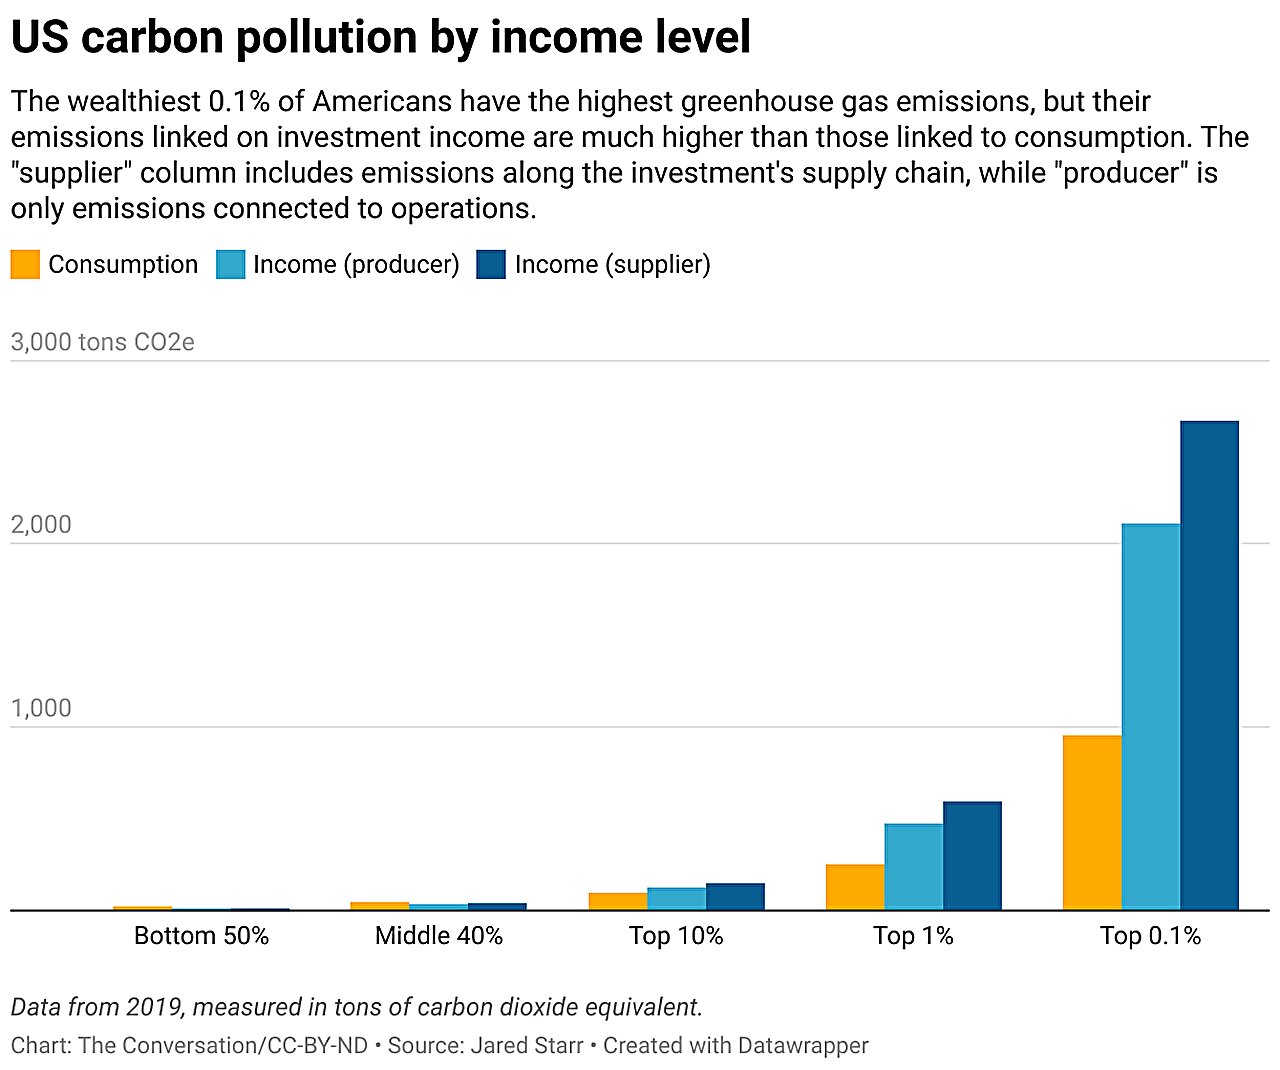 A carbon tax on investment income could be more fair and make it less profitable to pollute, analysis finds